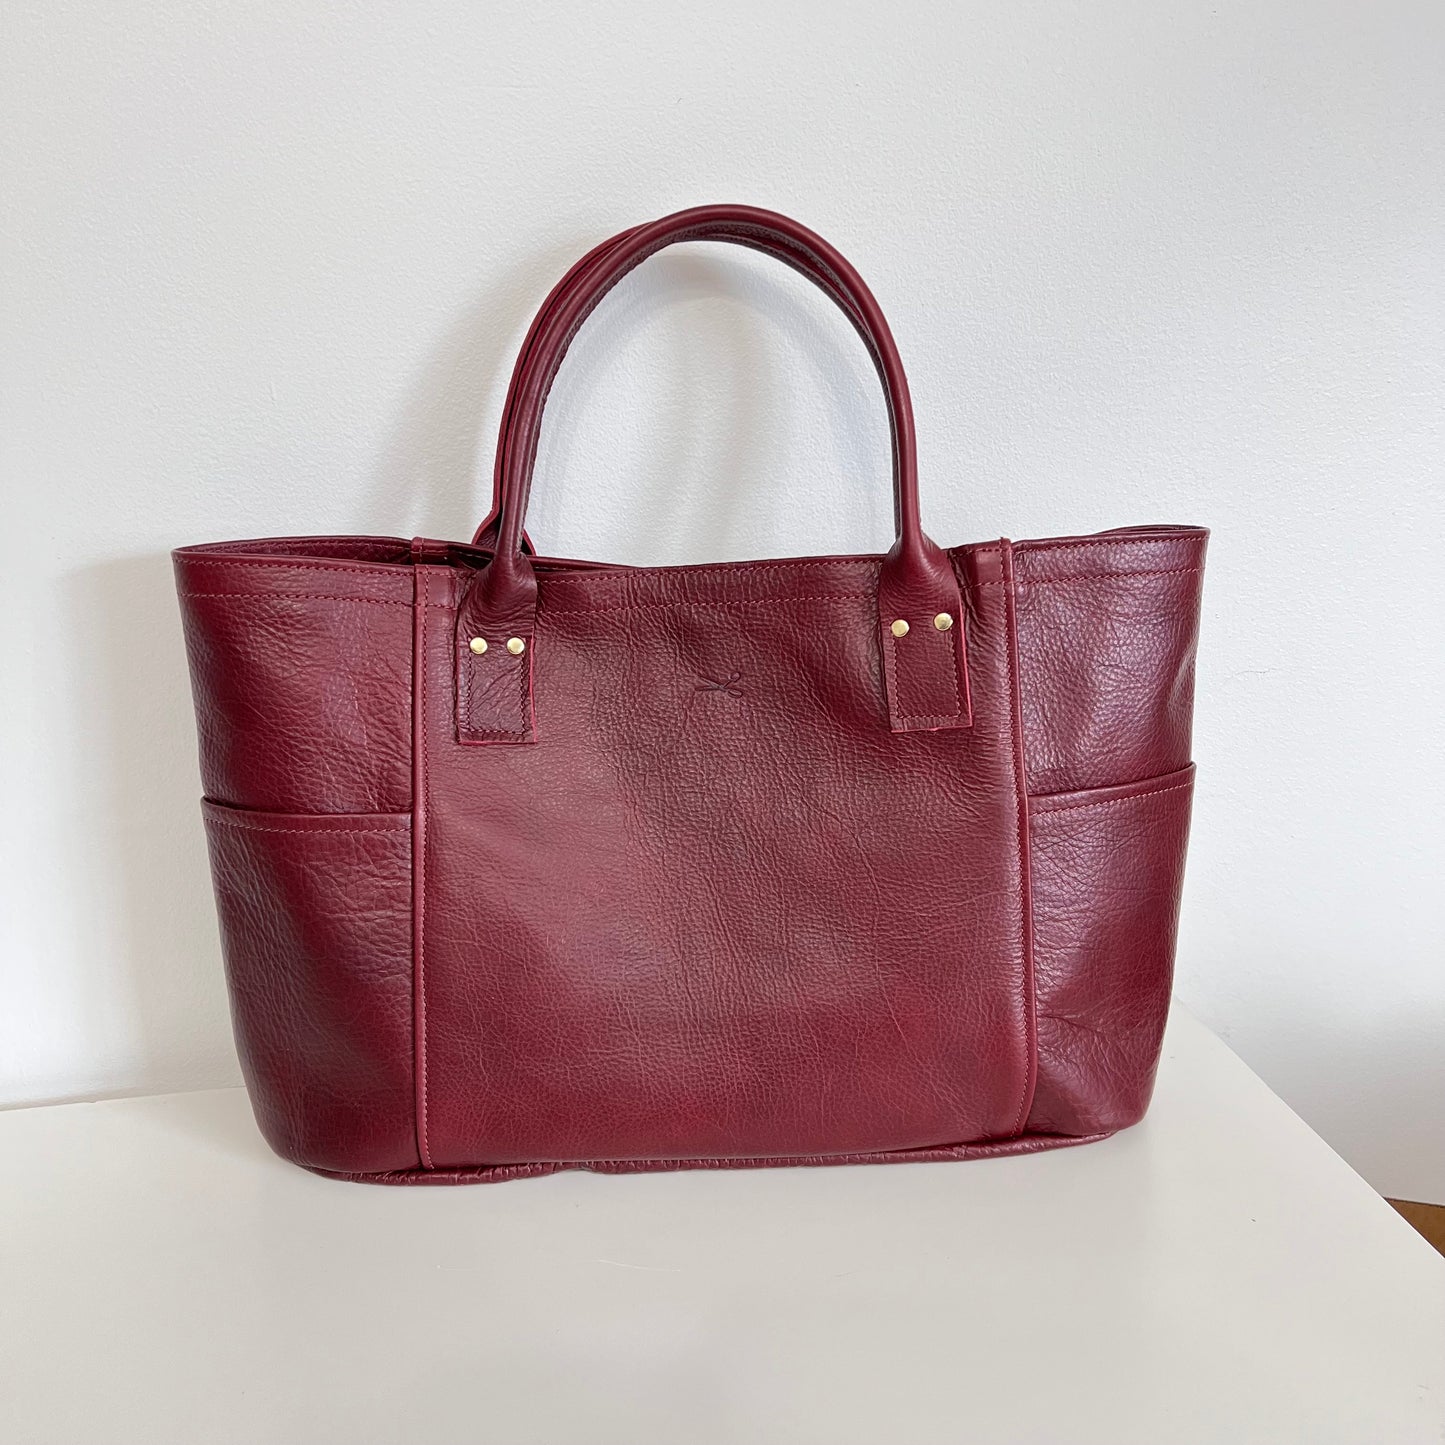 Carry-all Leather Bag- READY TO SHIP